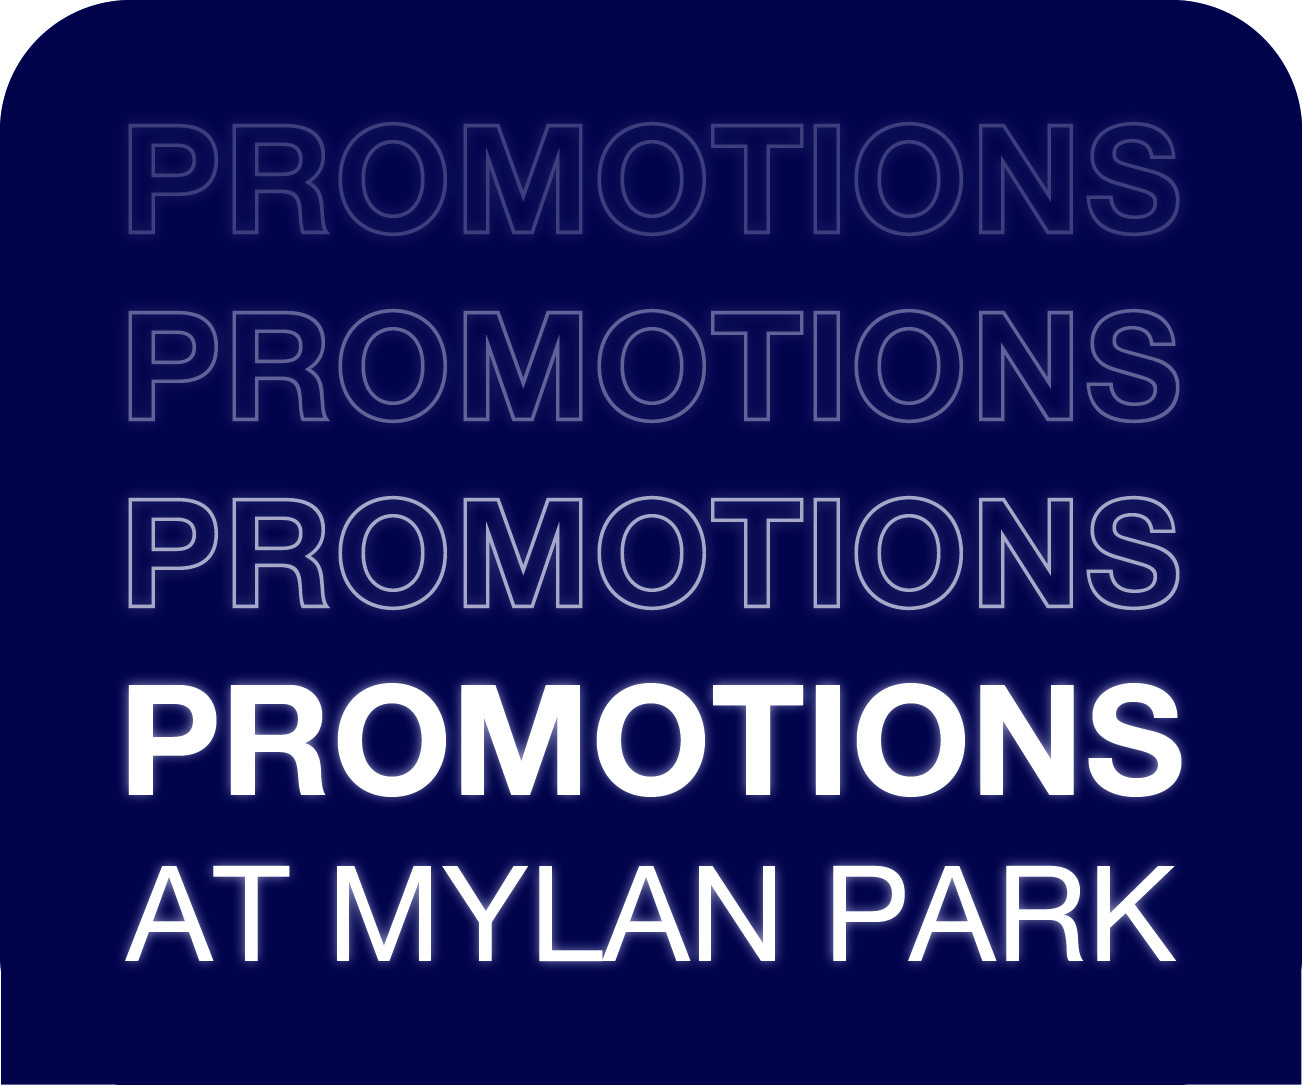 Promotions at Mylan Park